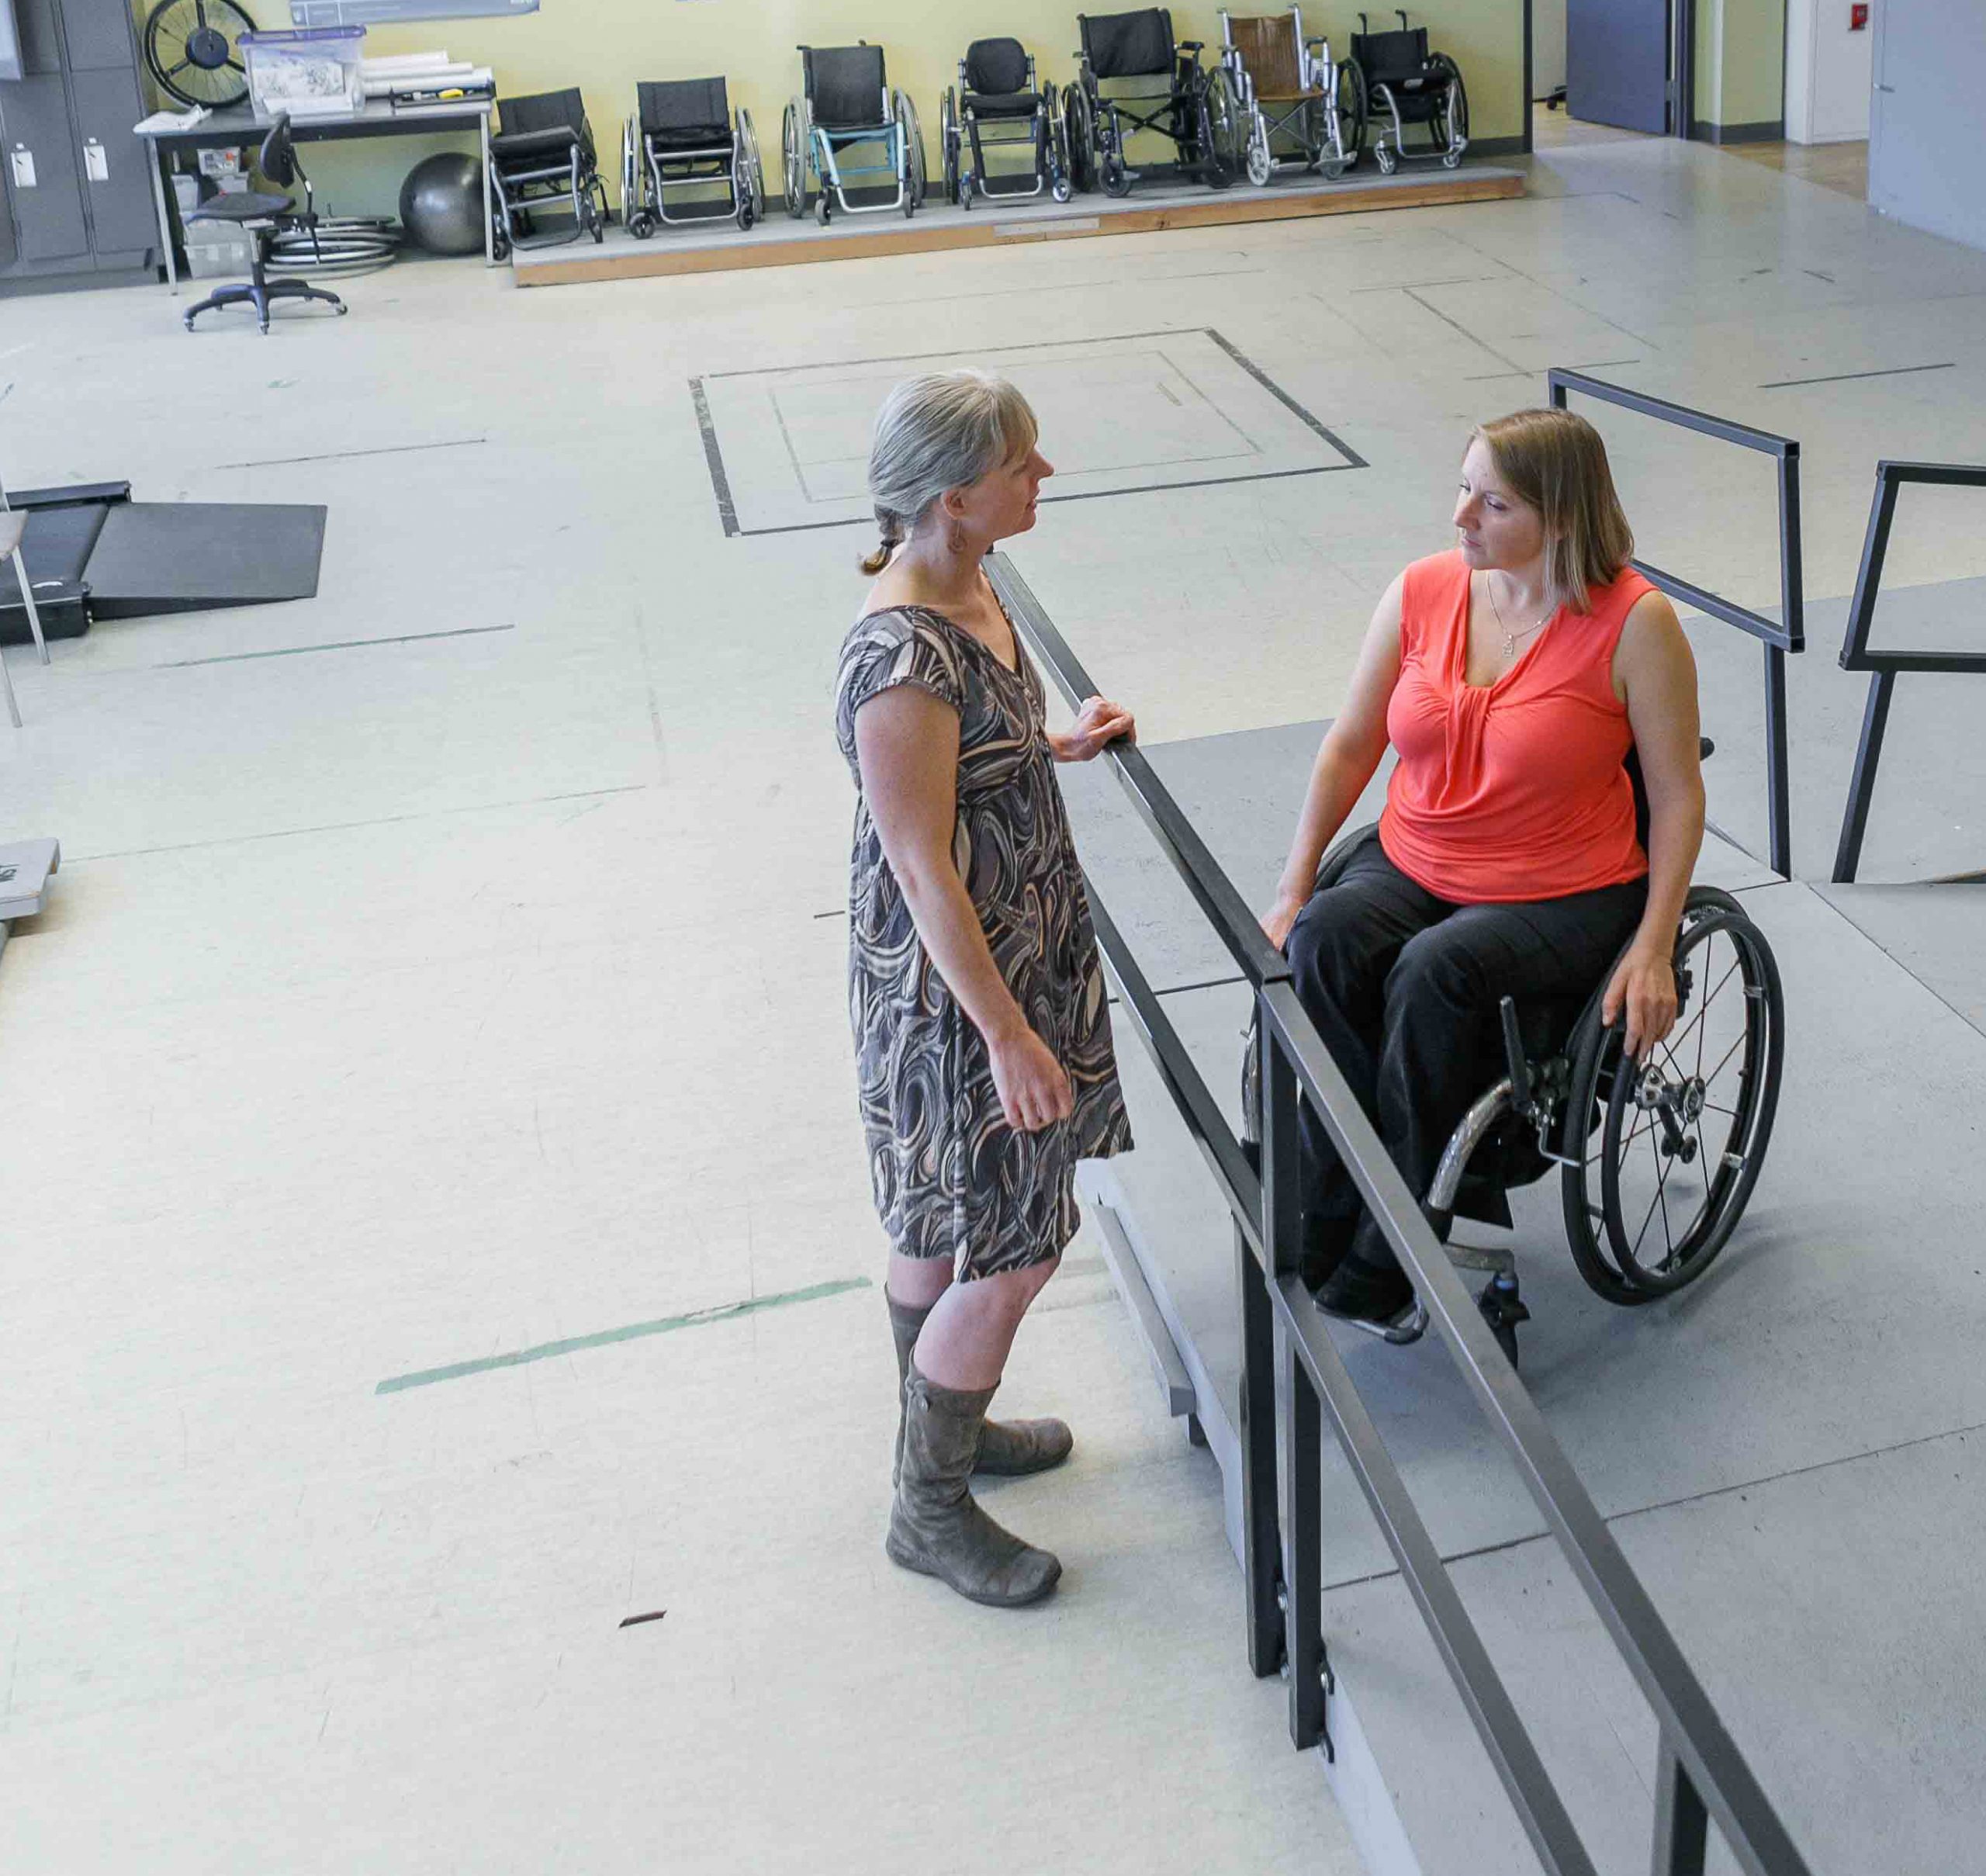 Woman using a wheelchair in an orange shirt on a ramp talks with a woman standing at a rail.